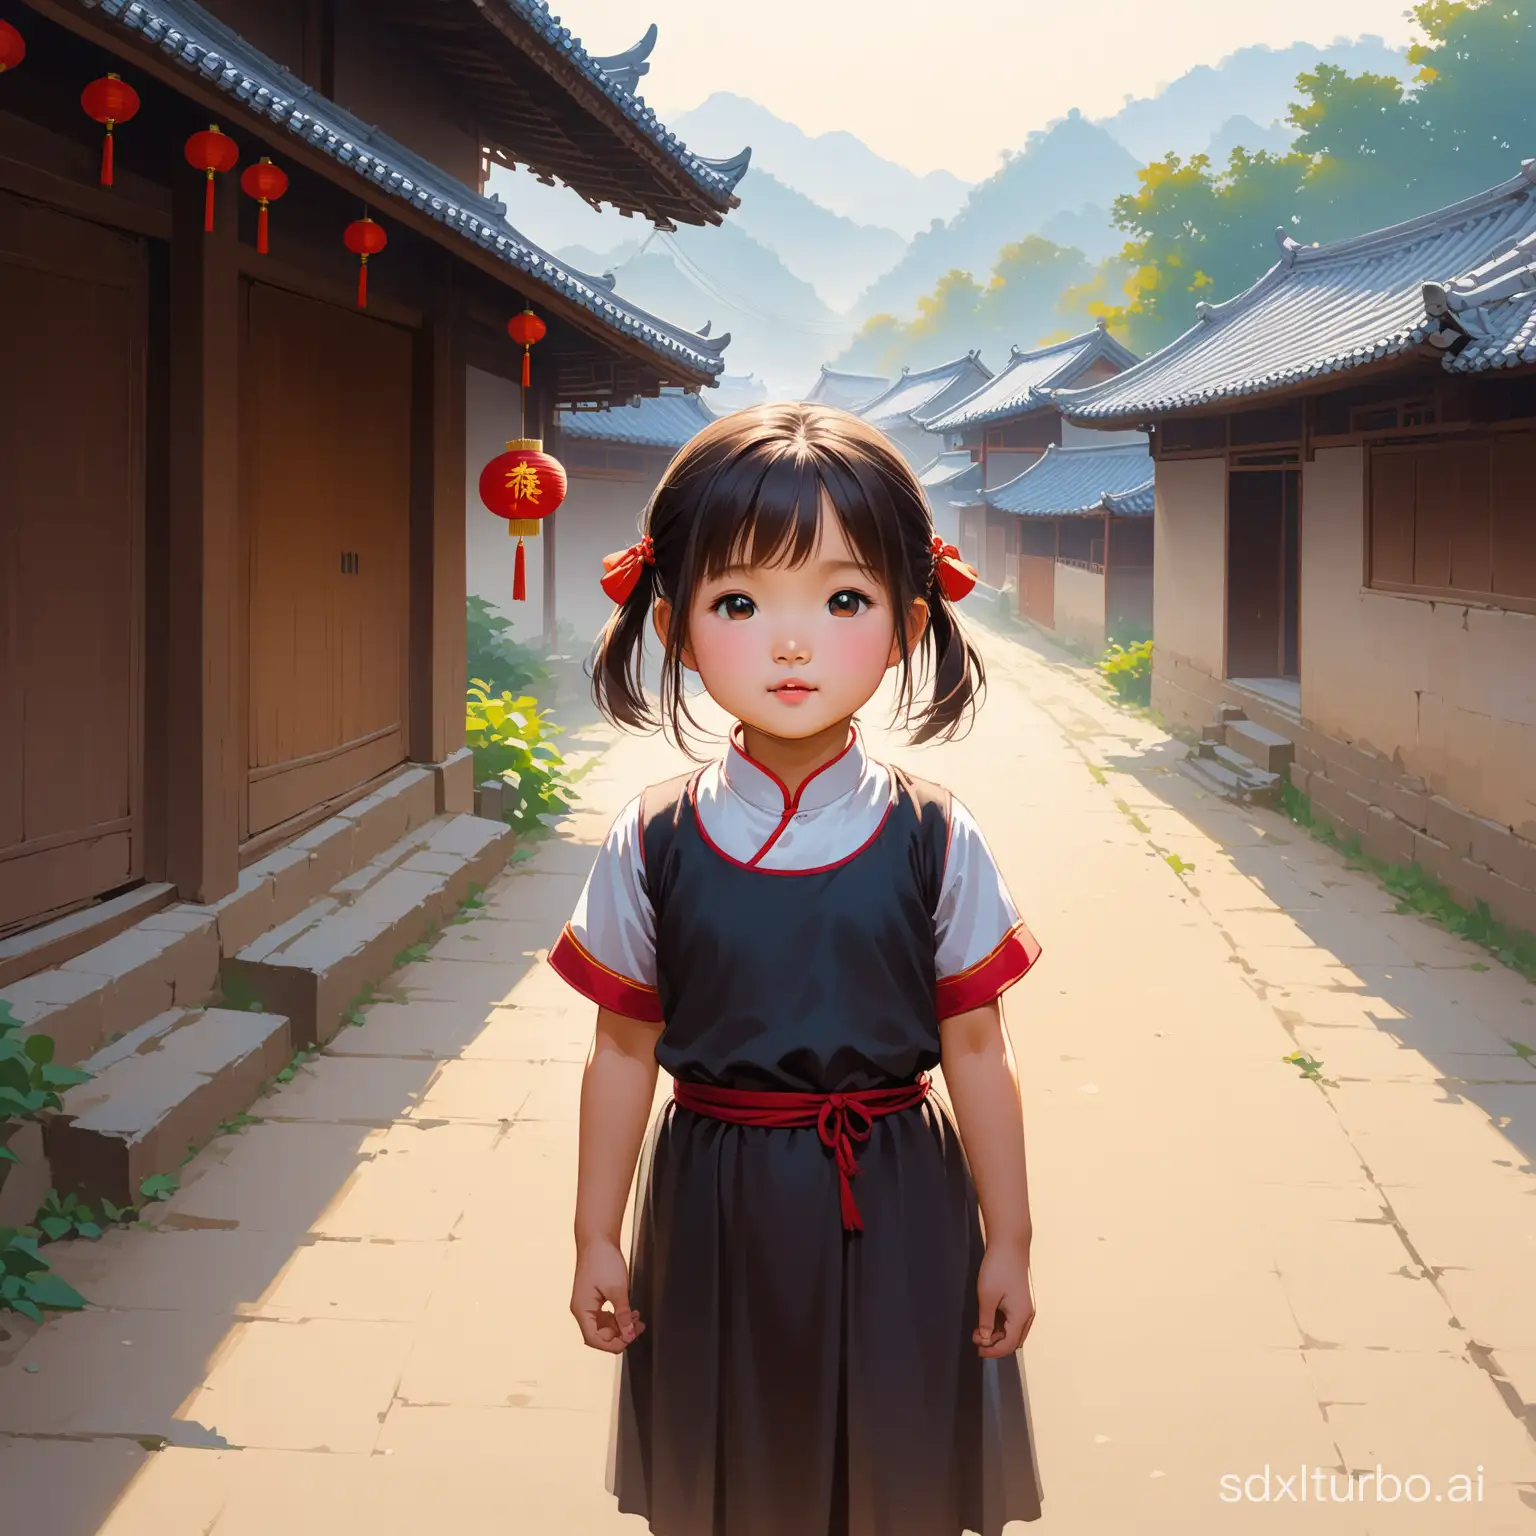 The little girl from the Chinese countryside.